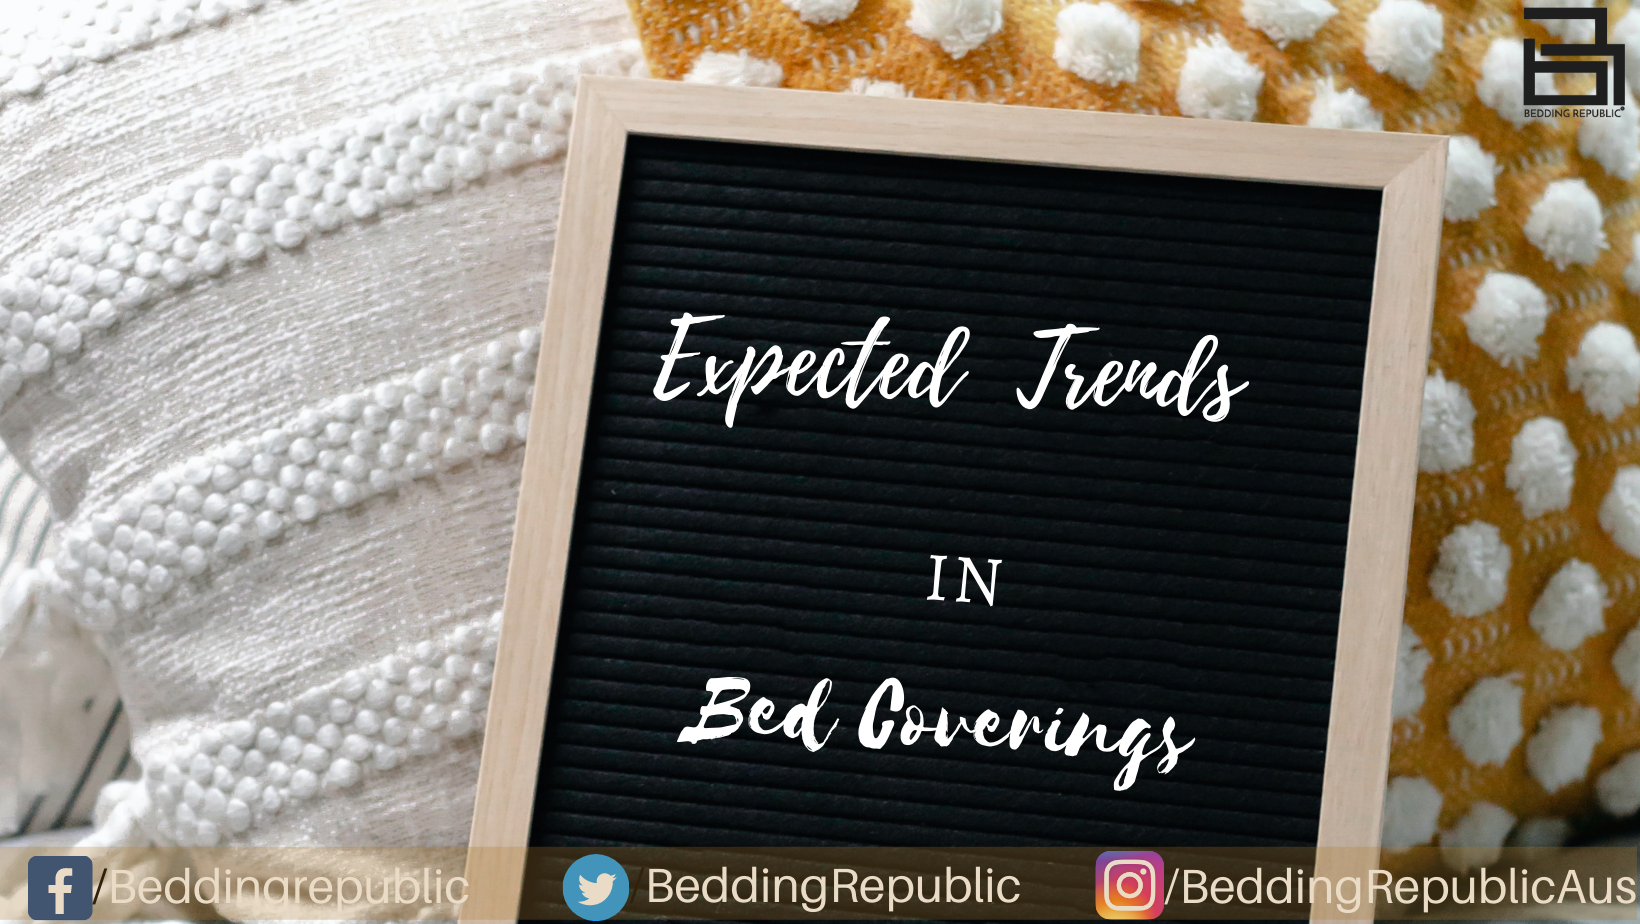 You are currently viewing Expected Trends In Bed Coverings